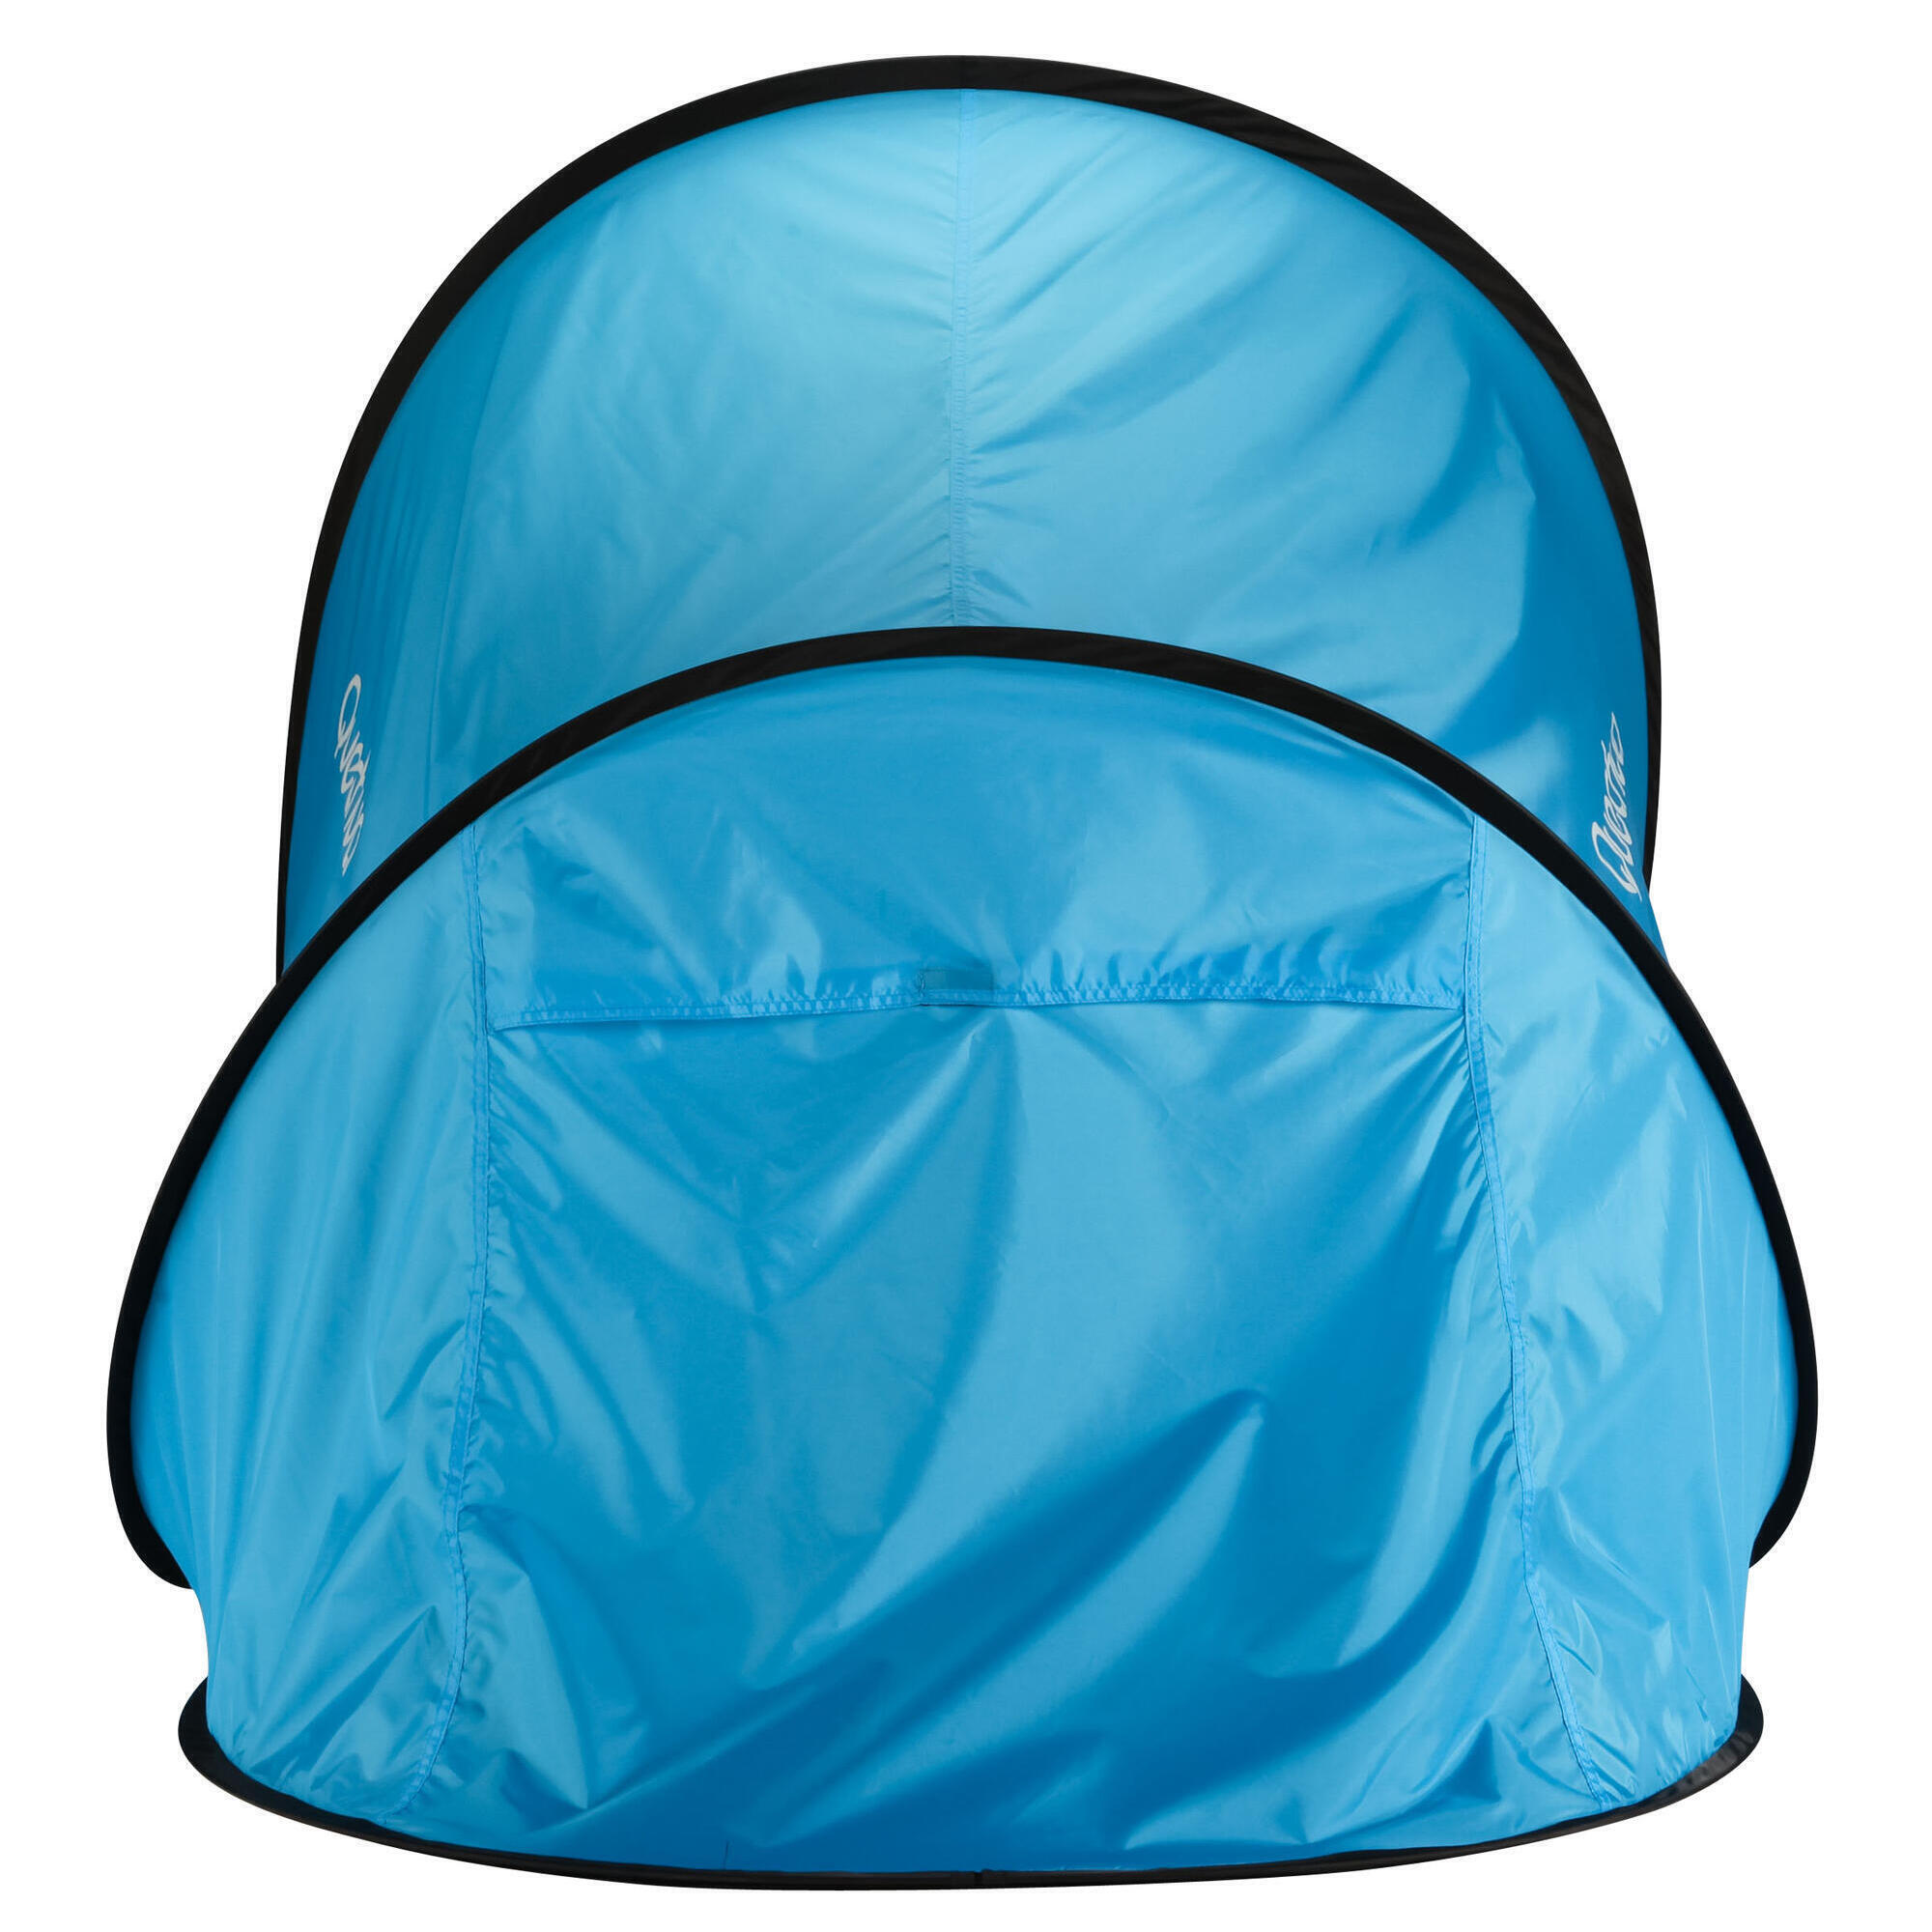 Instant camping shelter - 1 adult or 2 children - 2 seconds 0 4/13